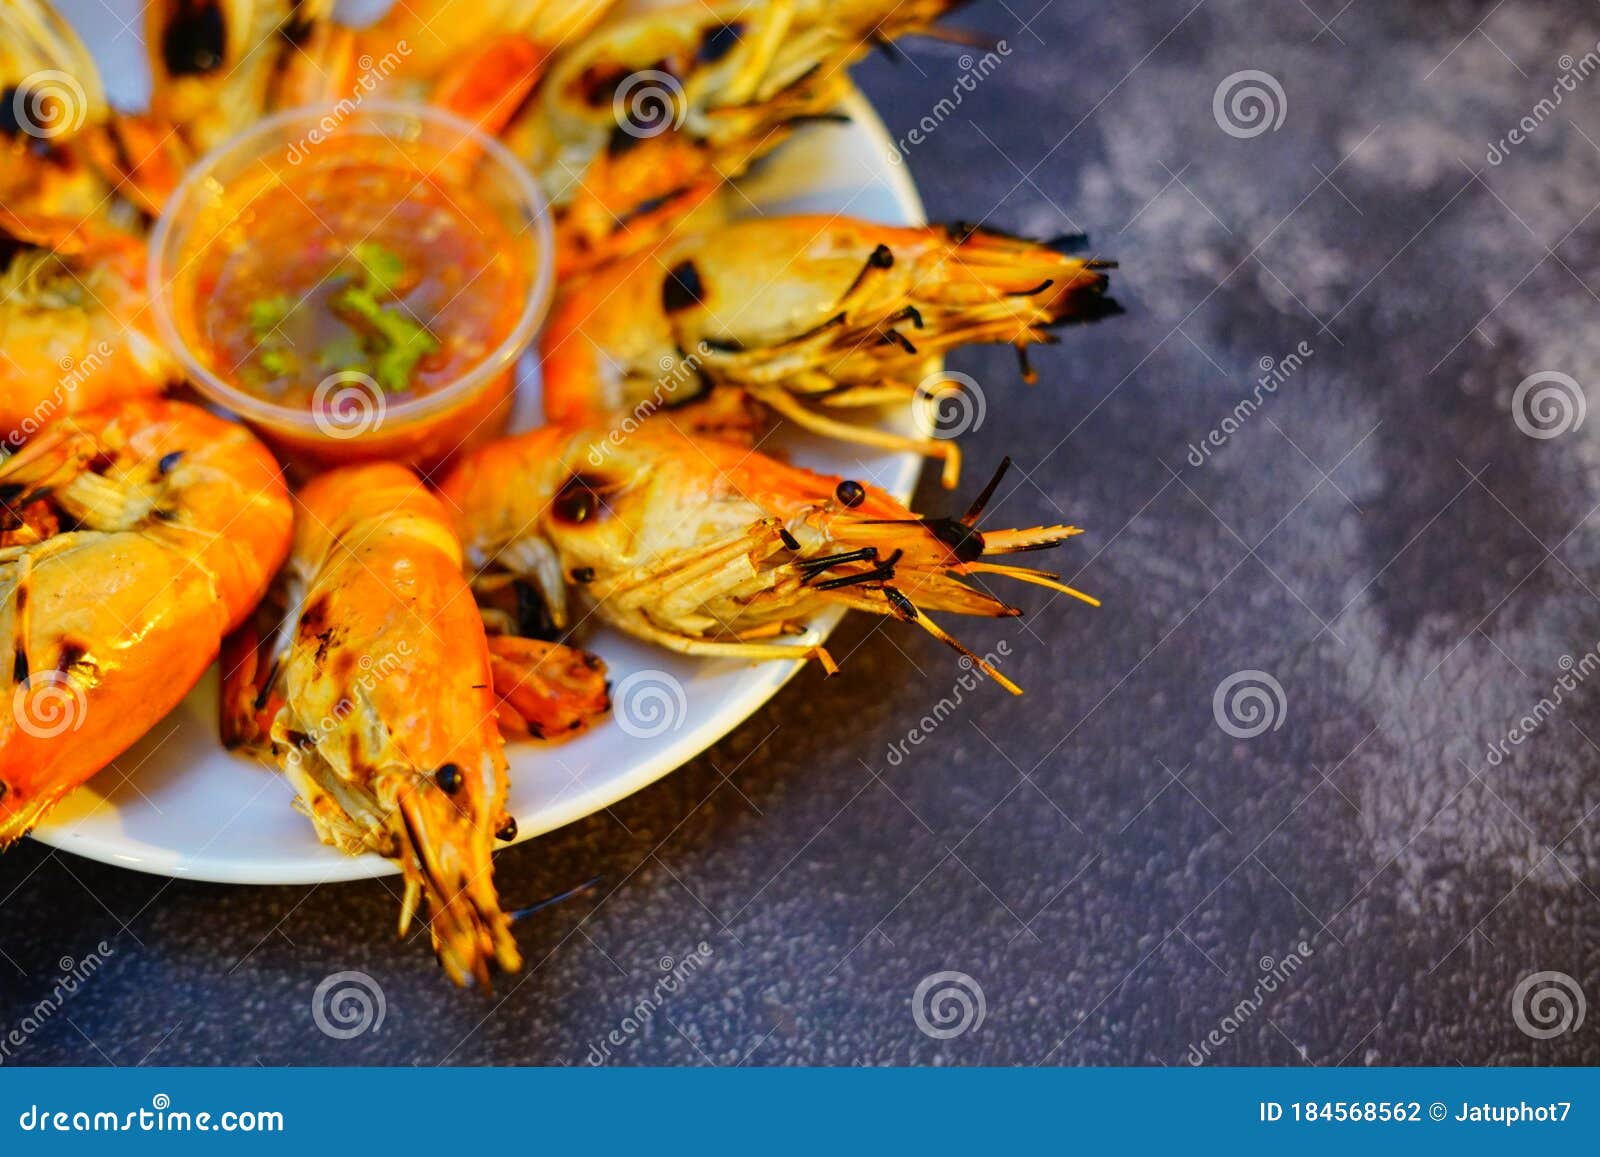 Grilled Shrimp Giant Freshwater River Prawn Grilling with Charcoal at ...